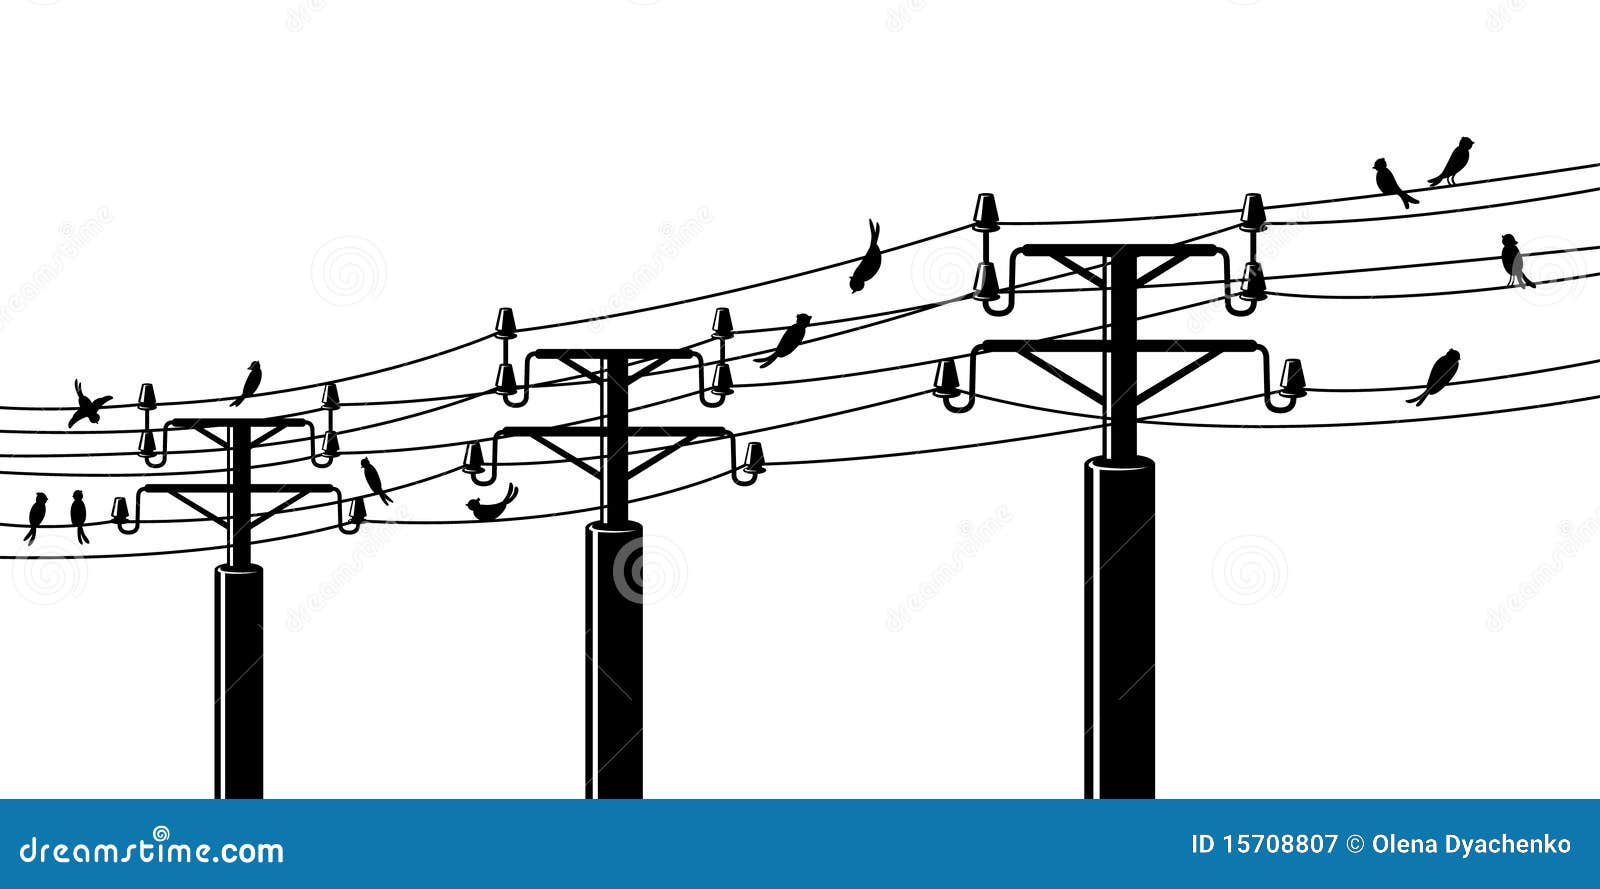 clipart power lines - photo #28